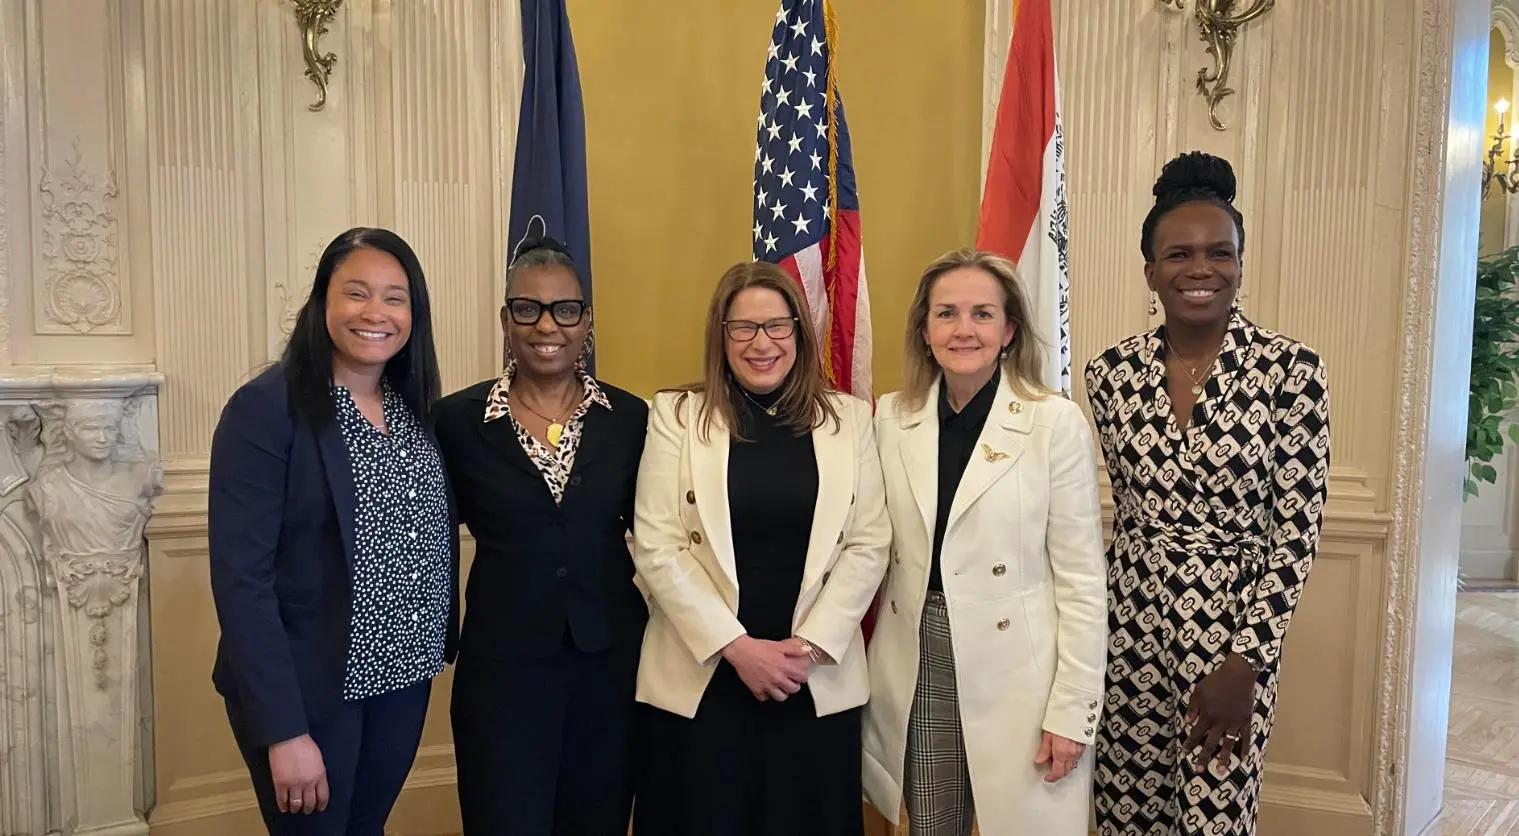 Congresswoman Dean hosted a changemakers roundtable in celebration of Women's History Month